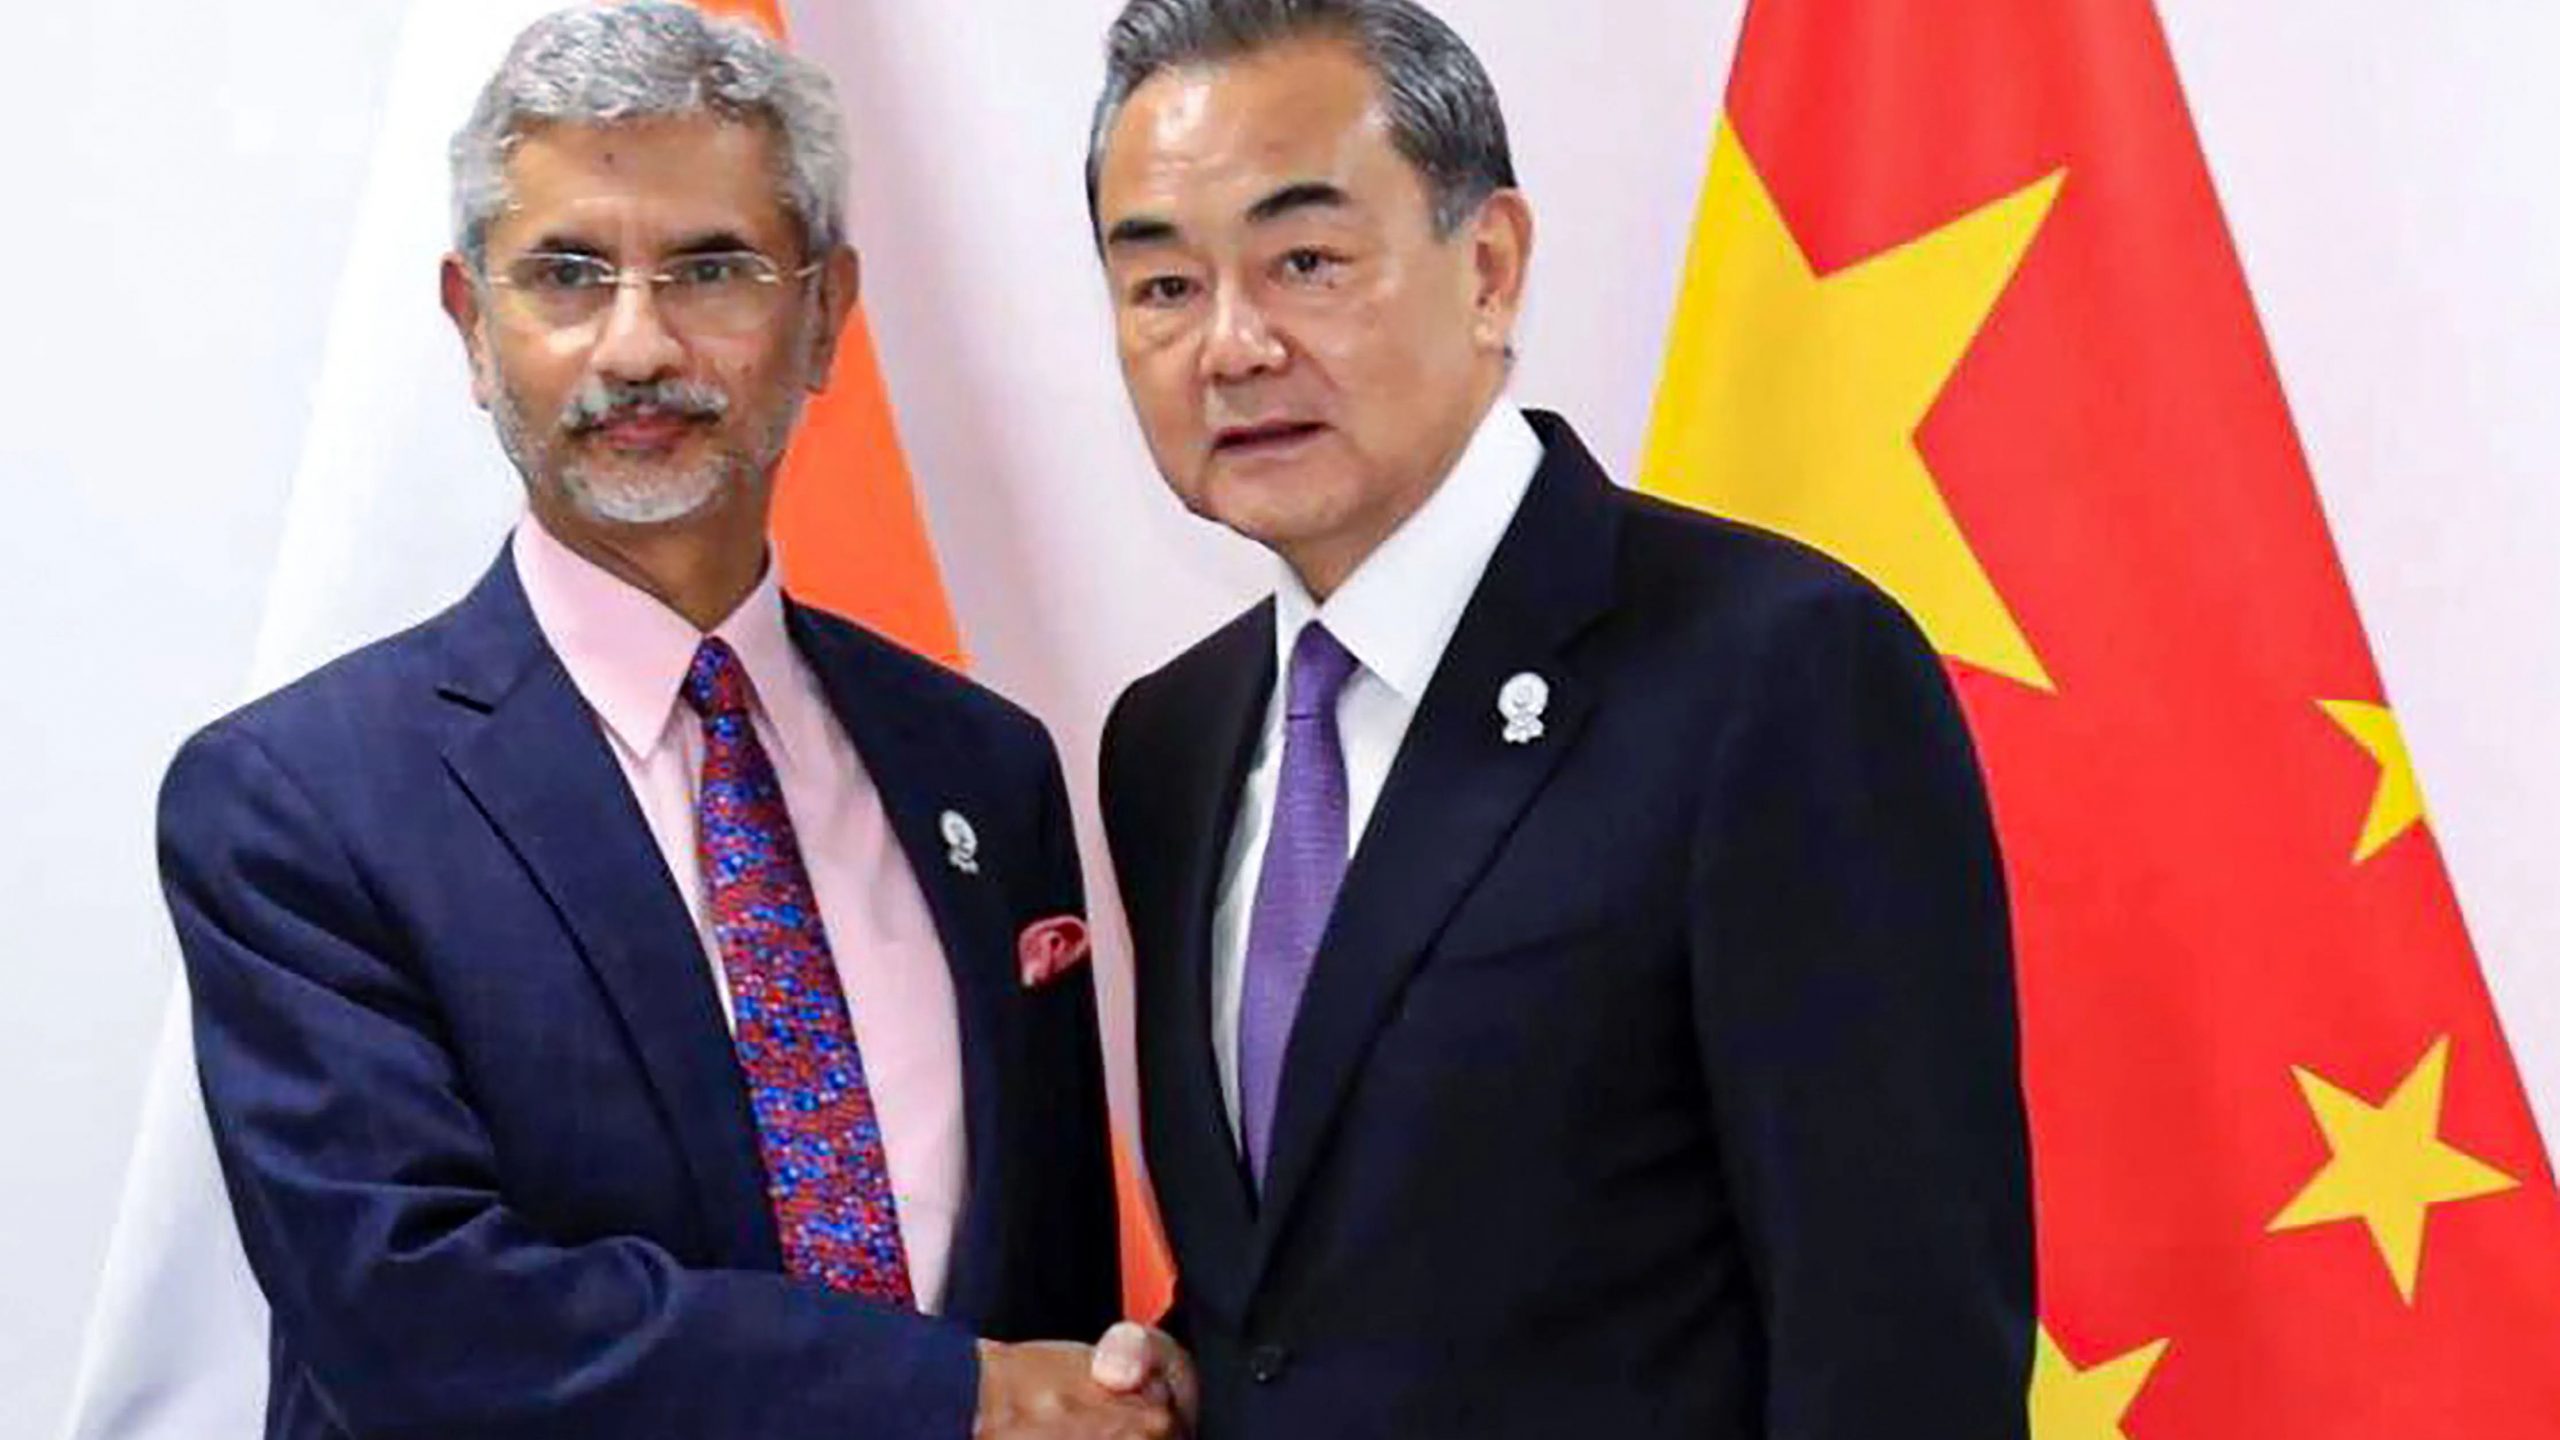 India, China agree to continue work towards ‘complete disengagement’ in Ladakh: MEA